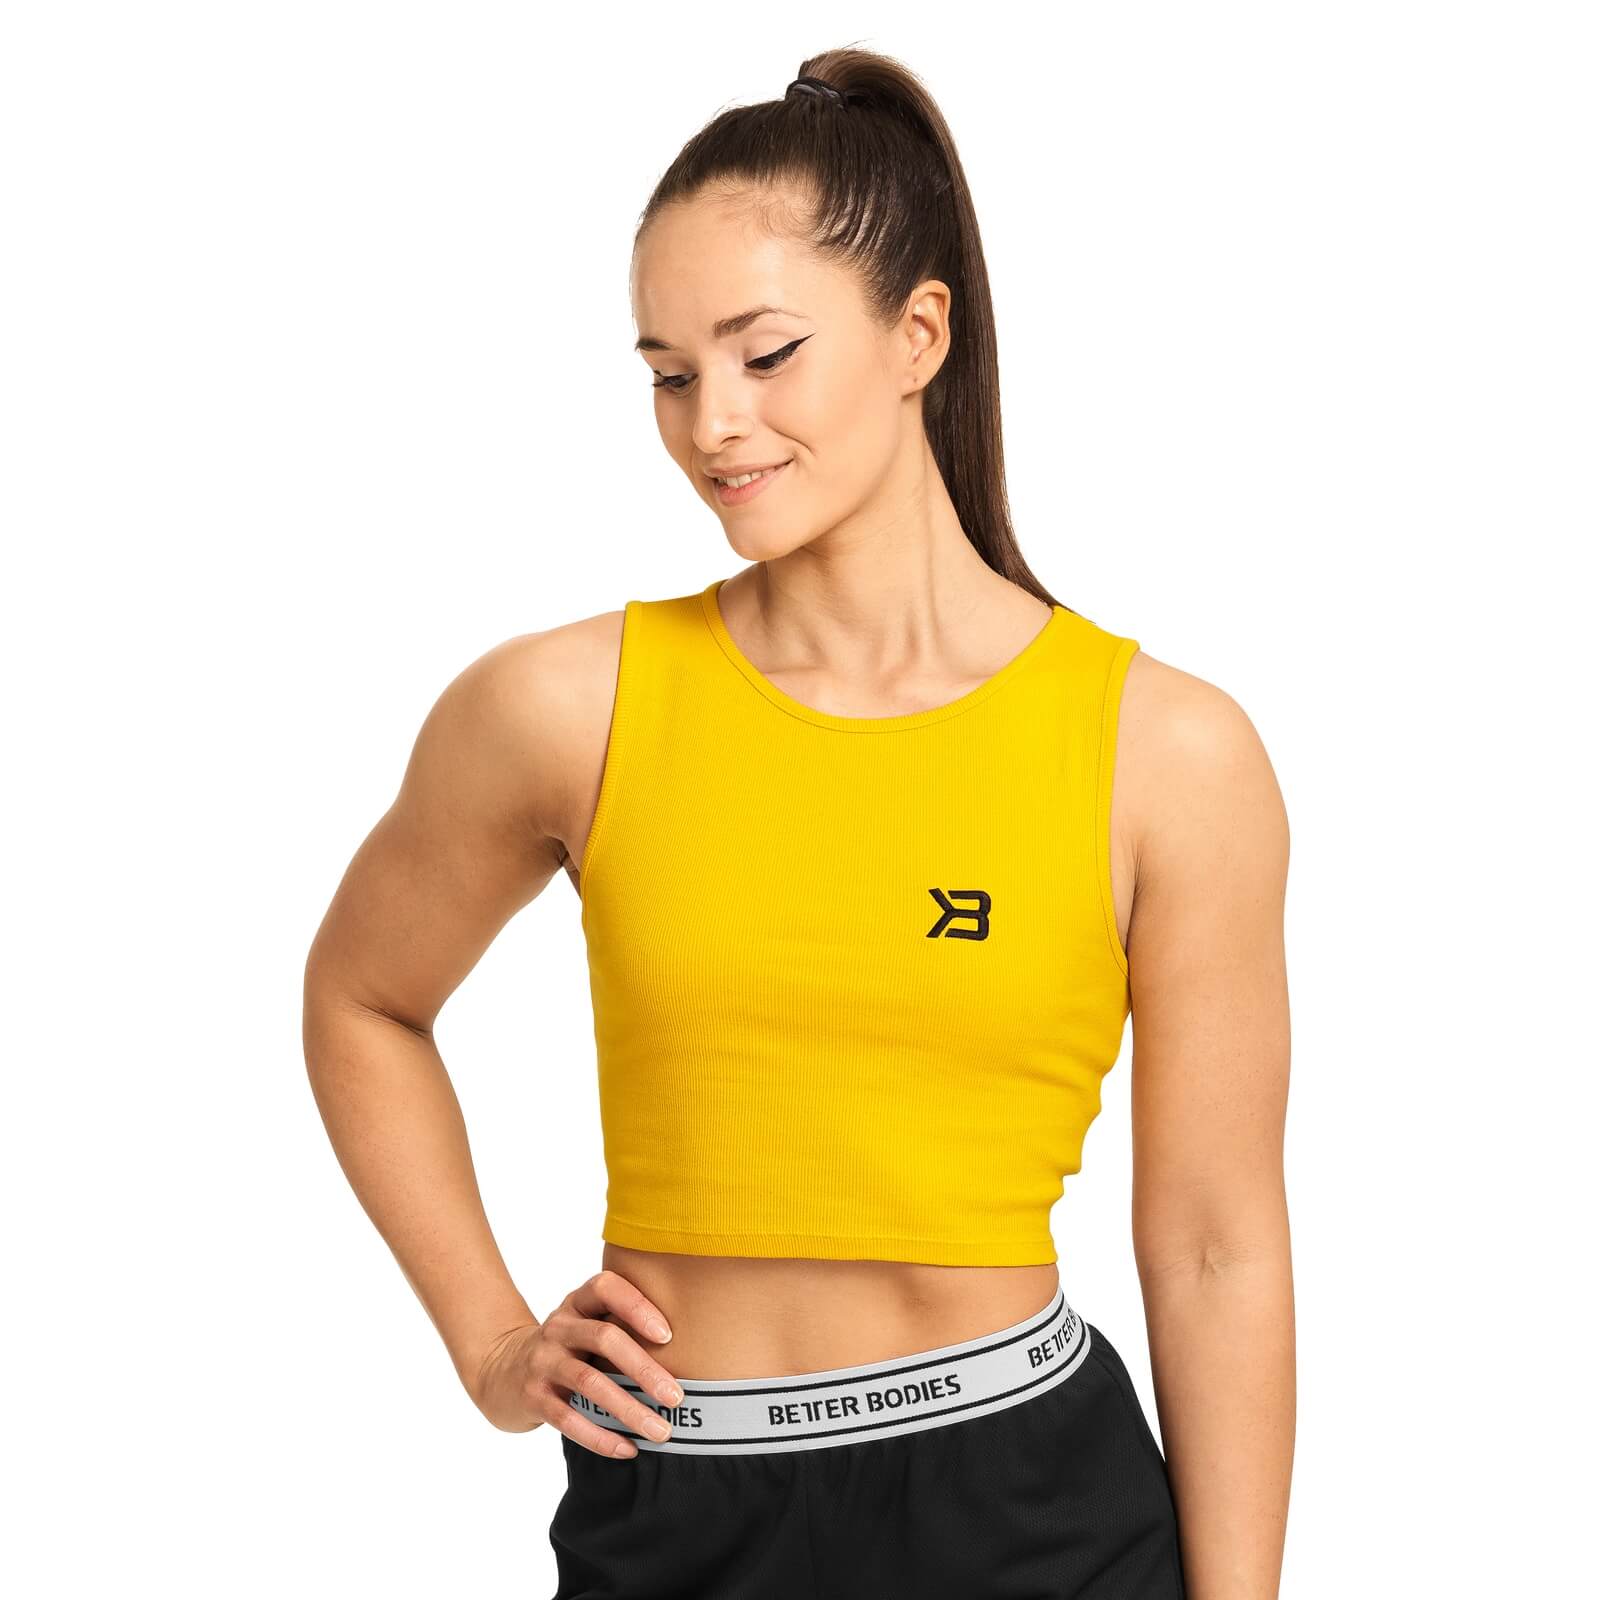 Astoria Laced Tank, yellow, Better Bodies